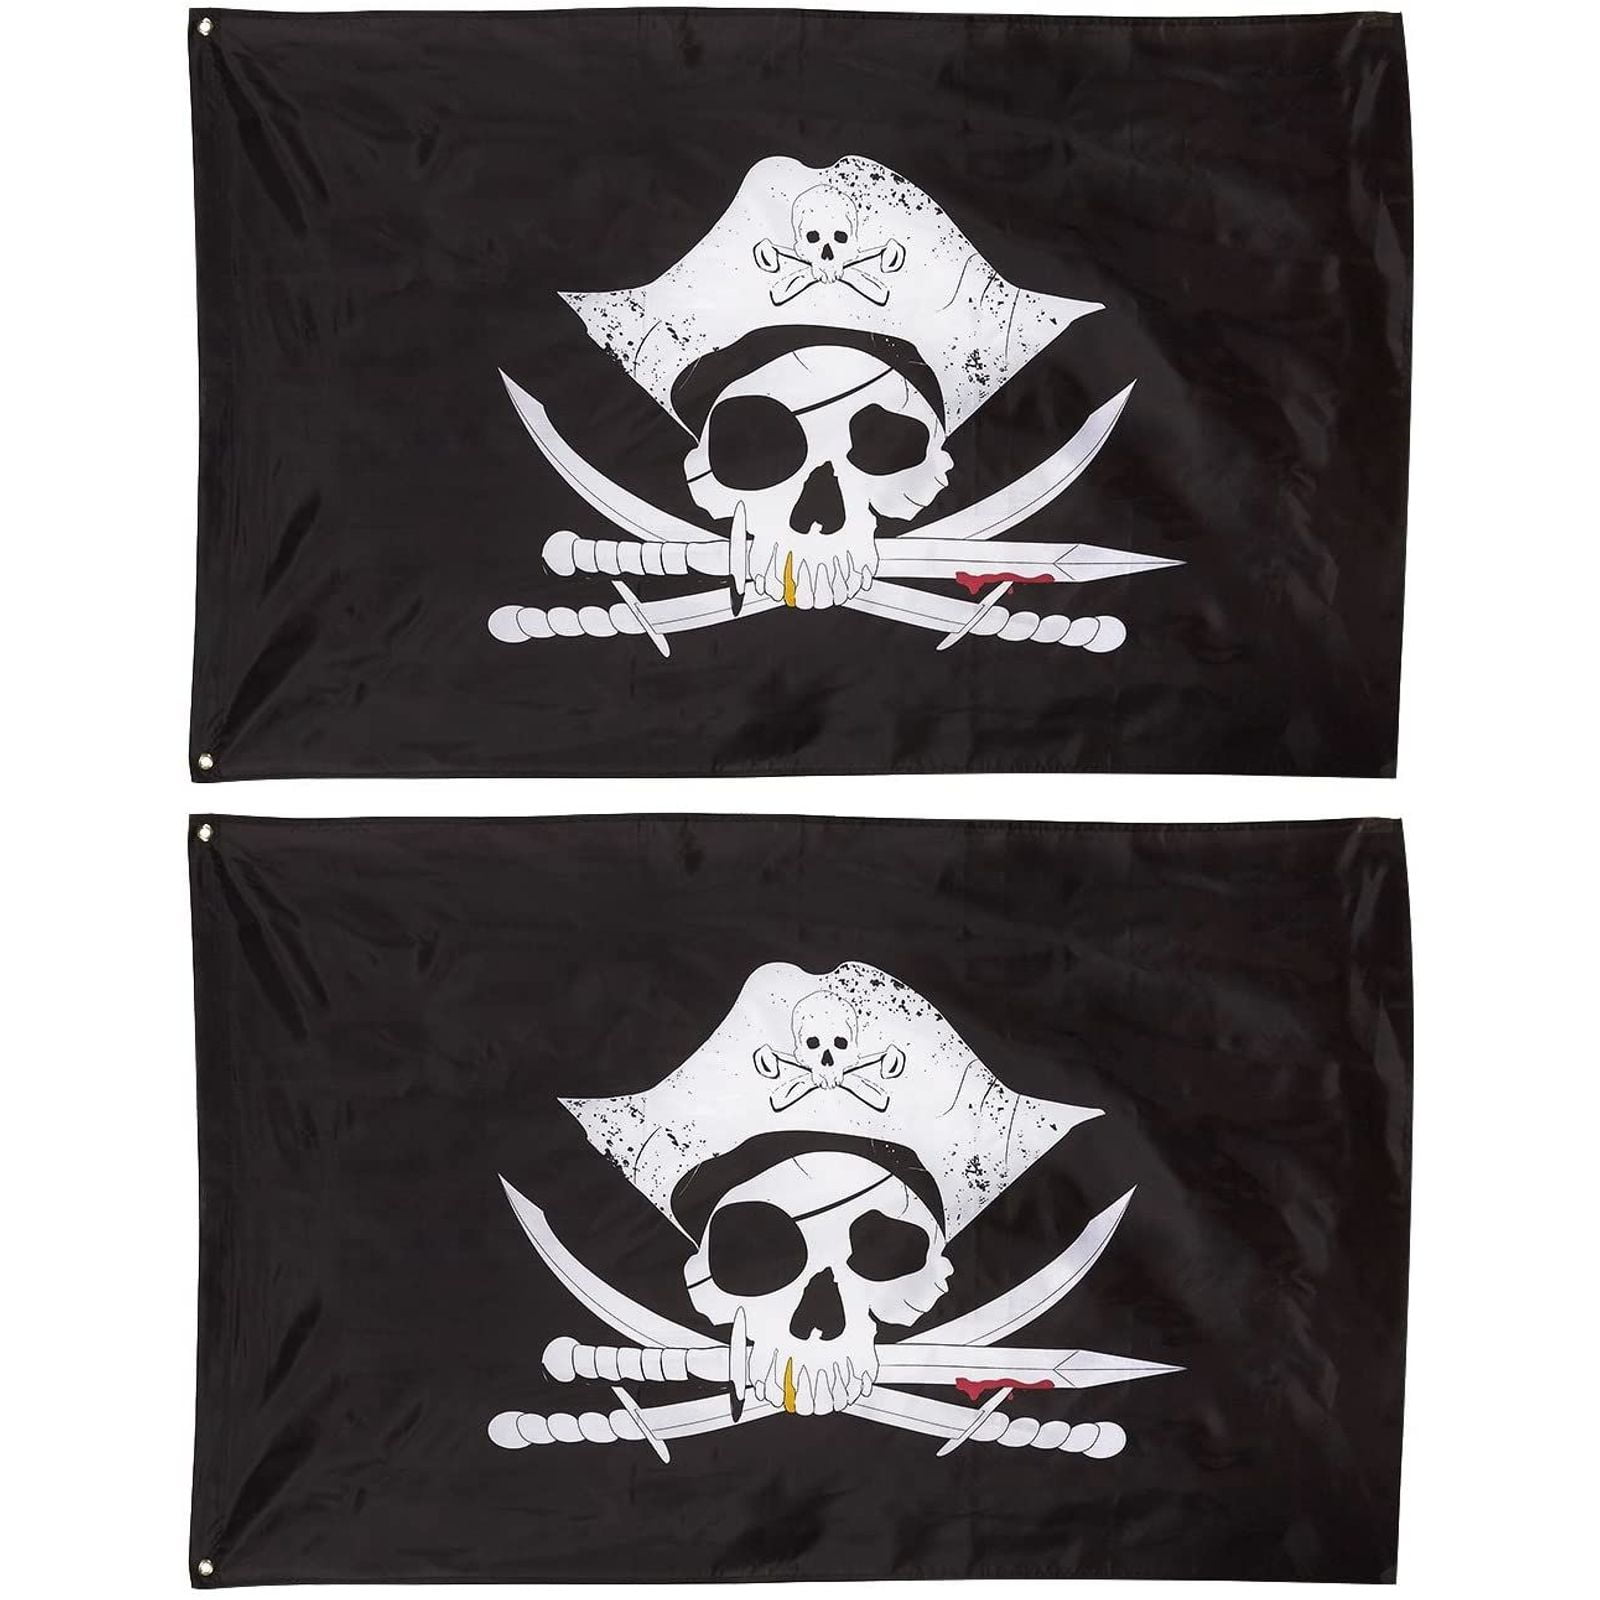 Crossed Sabres Small Flag 3ft x 5ft Skull & Crossbones Pirate Jolly Roger Party